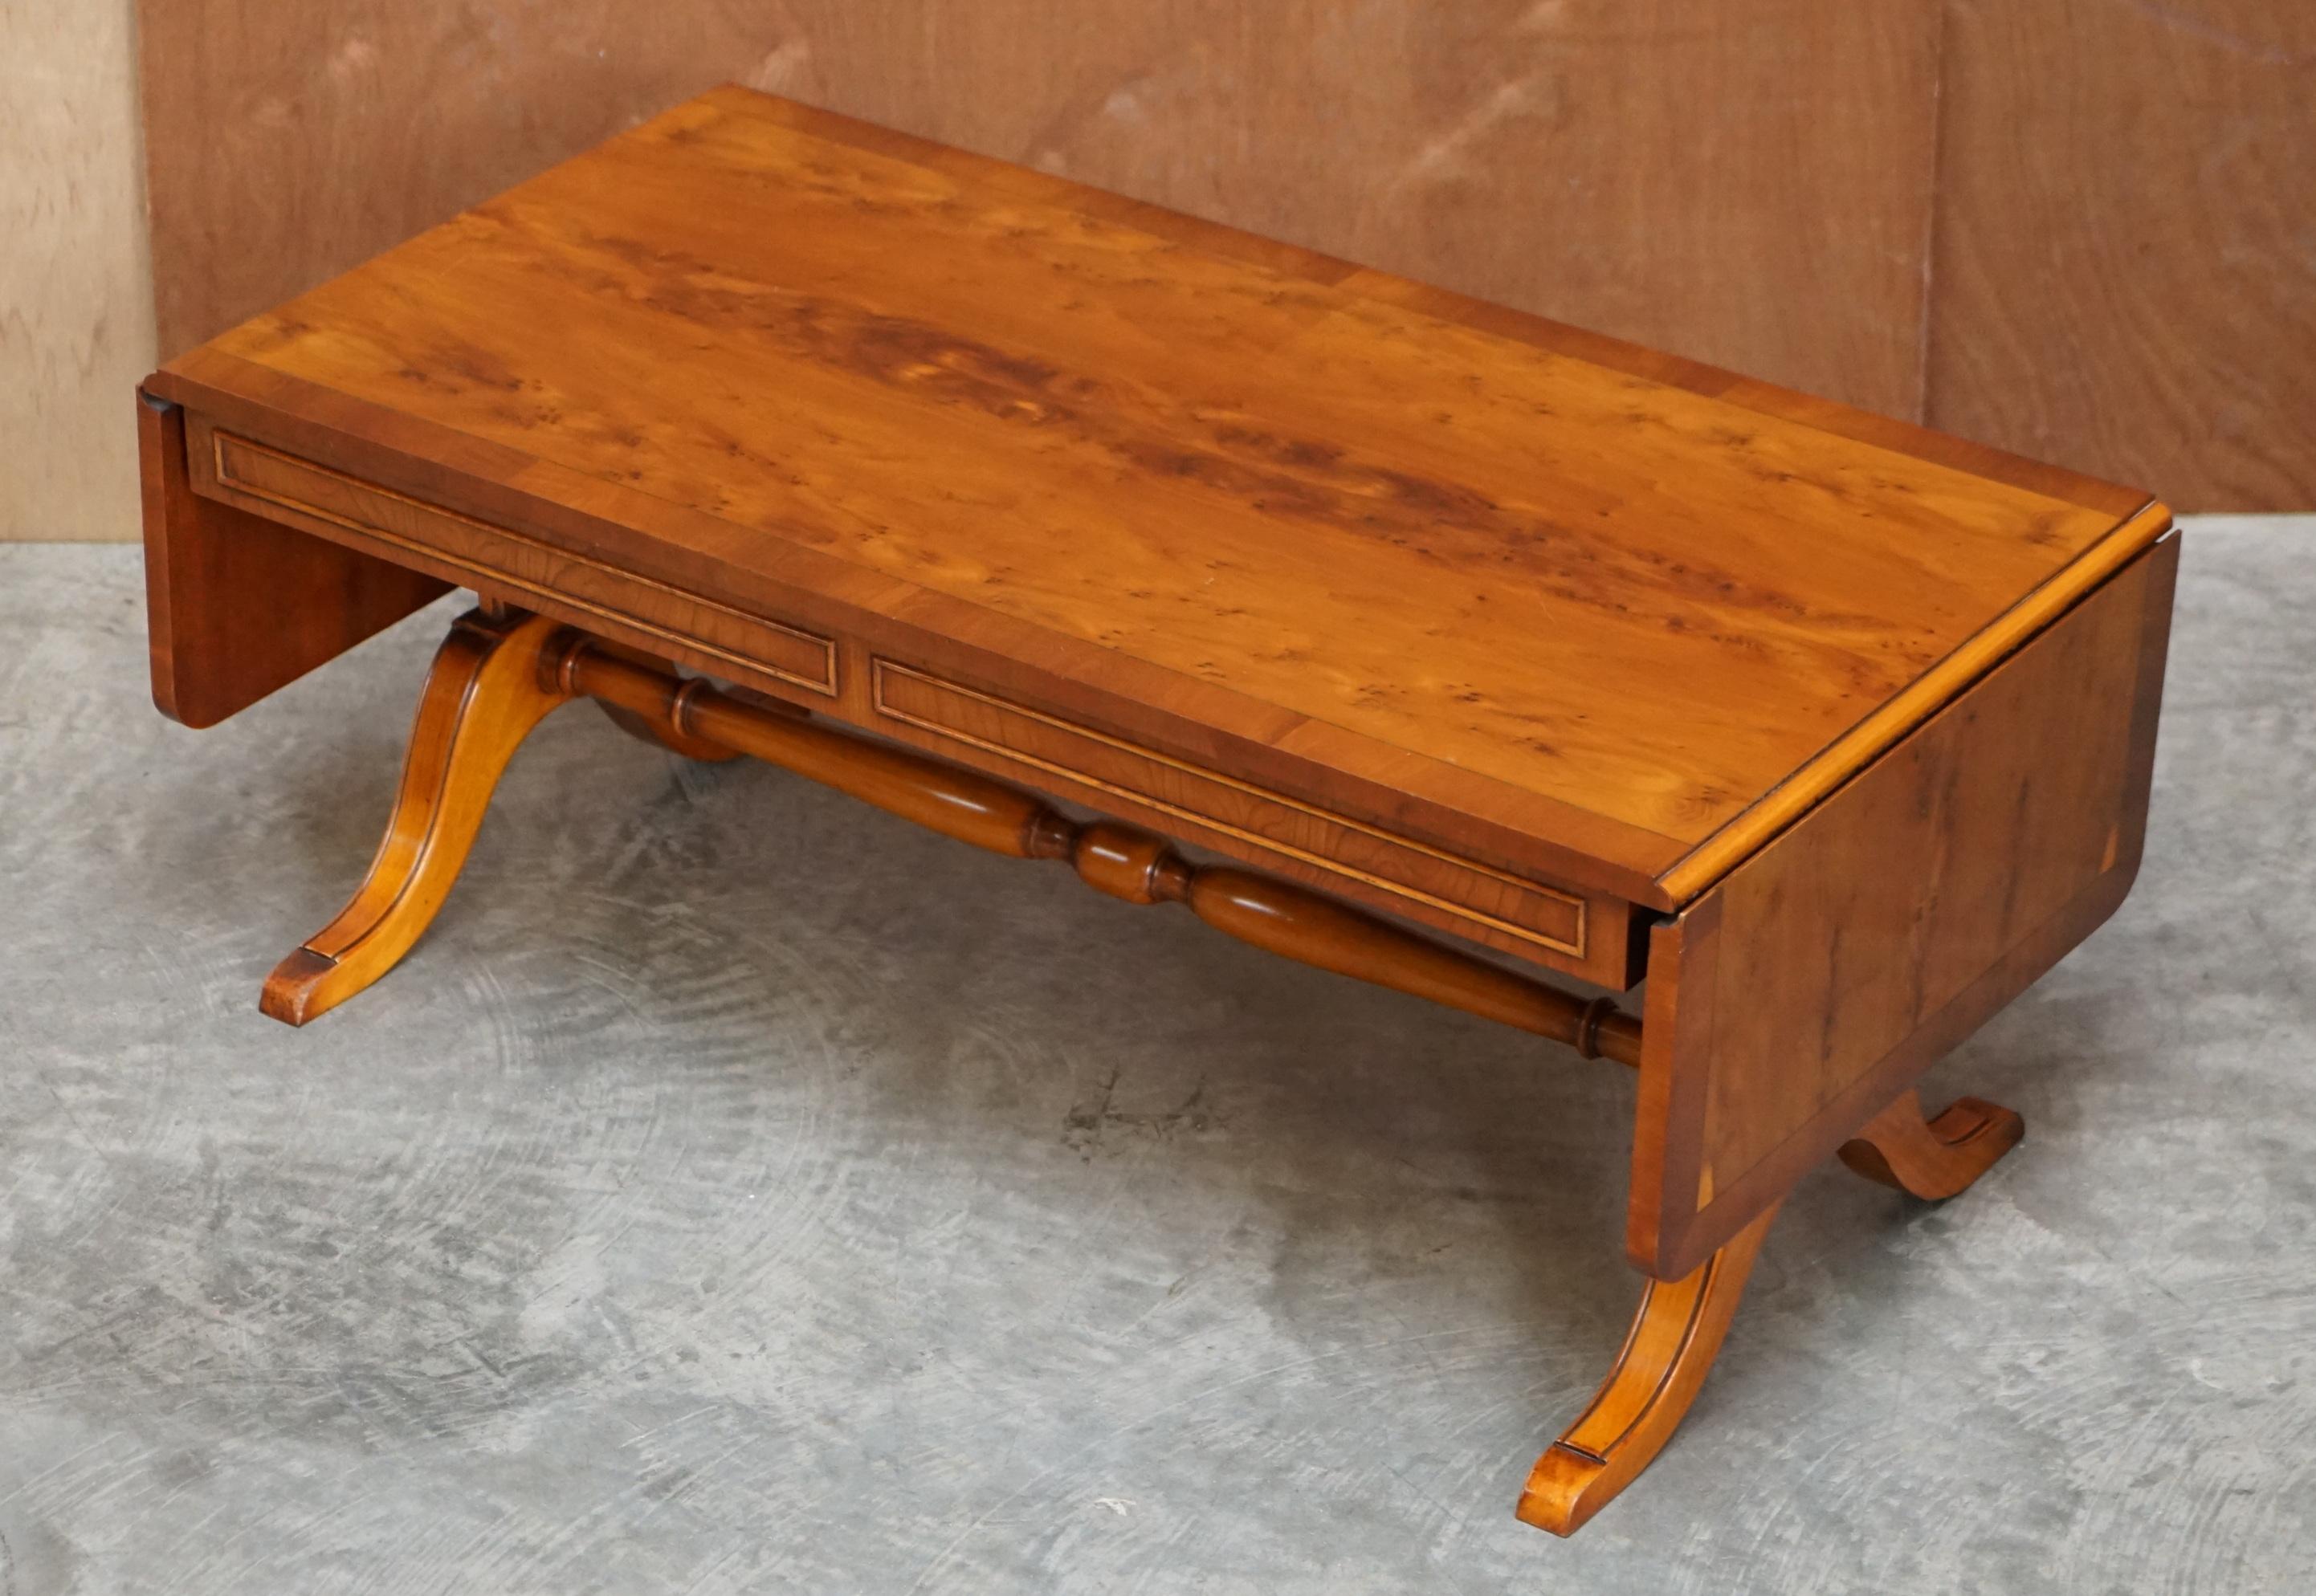 We are delighted to offer for sale this lovely condition Bevan Funnell Burr Yew wood extending coffee table which is part of a suite

This is a very well made and versatile piece with a timber patina to die for.

This piece is in fine order,